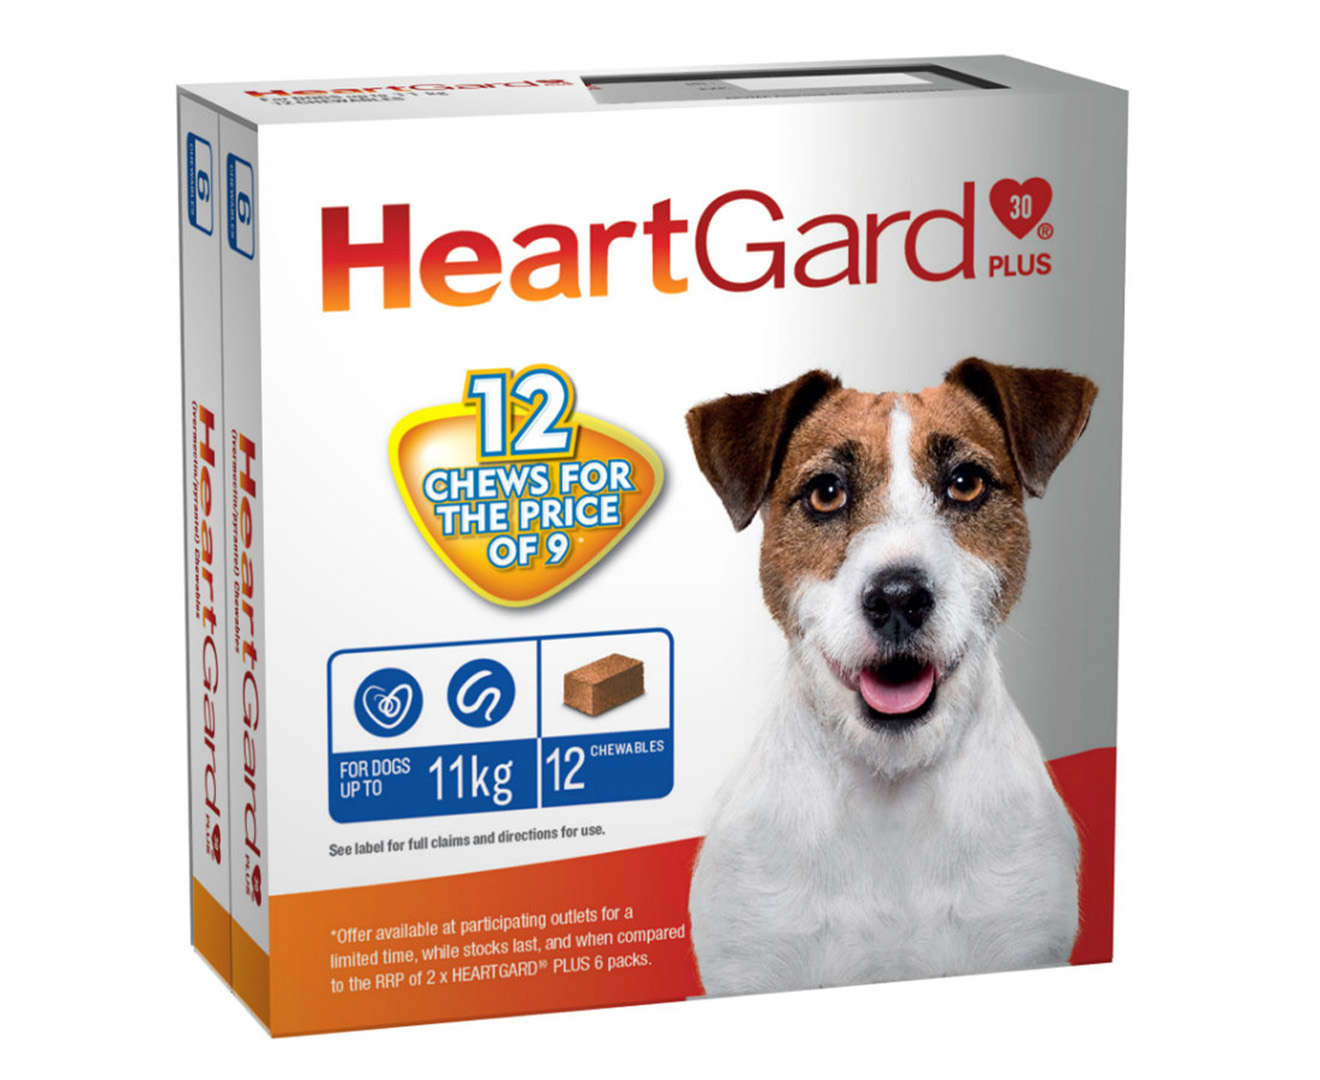 HeartGard Plus Worm Protection Chews for Small Dogs Up To 11kg 12pk